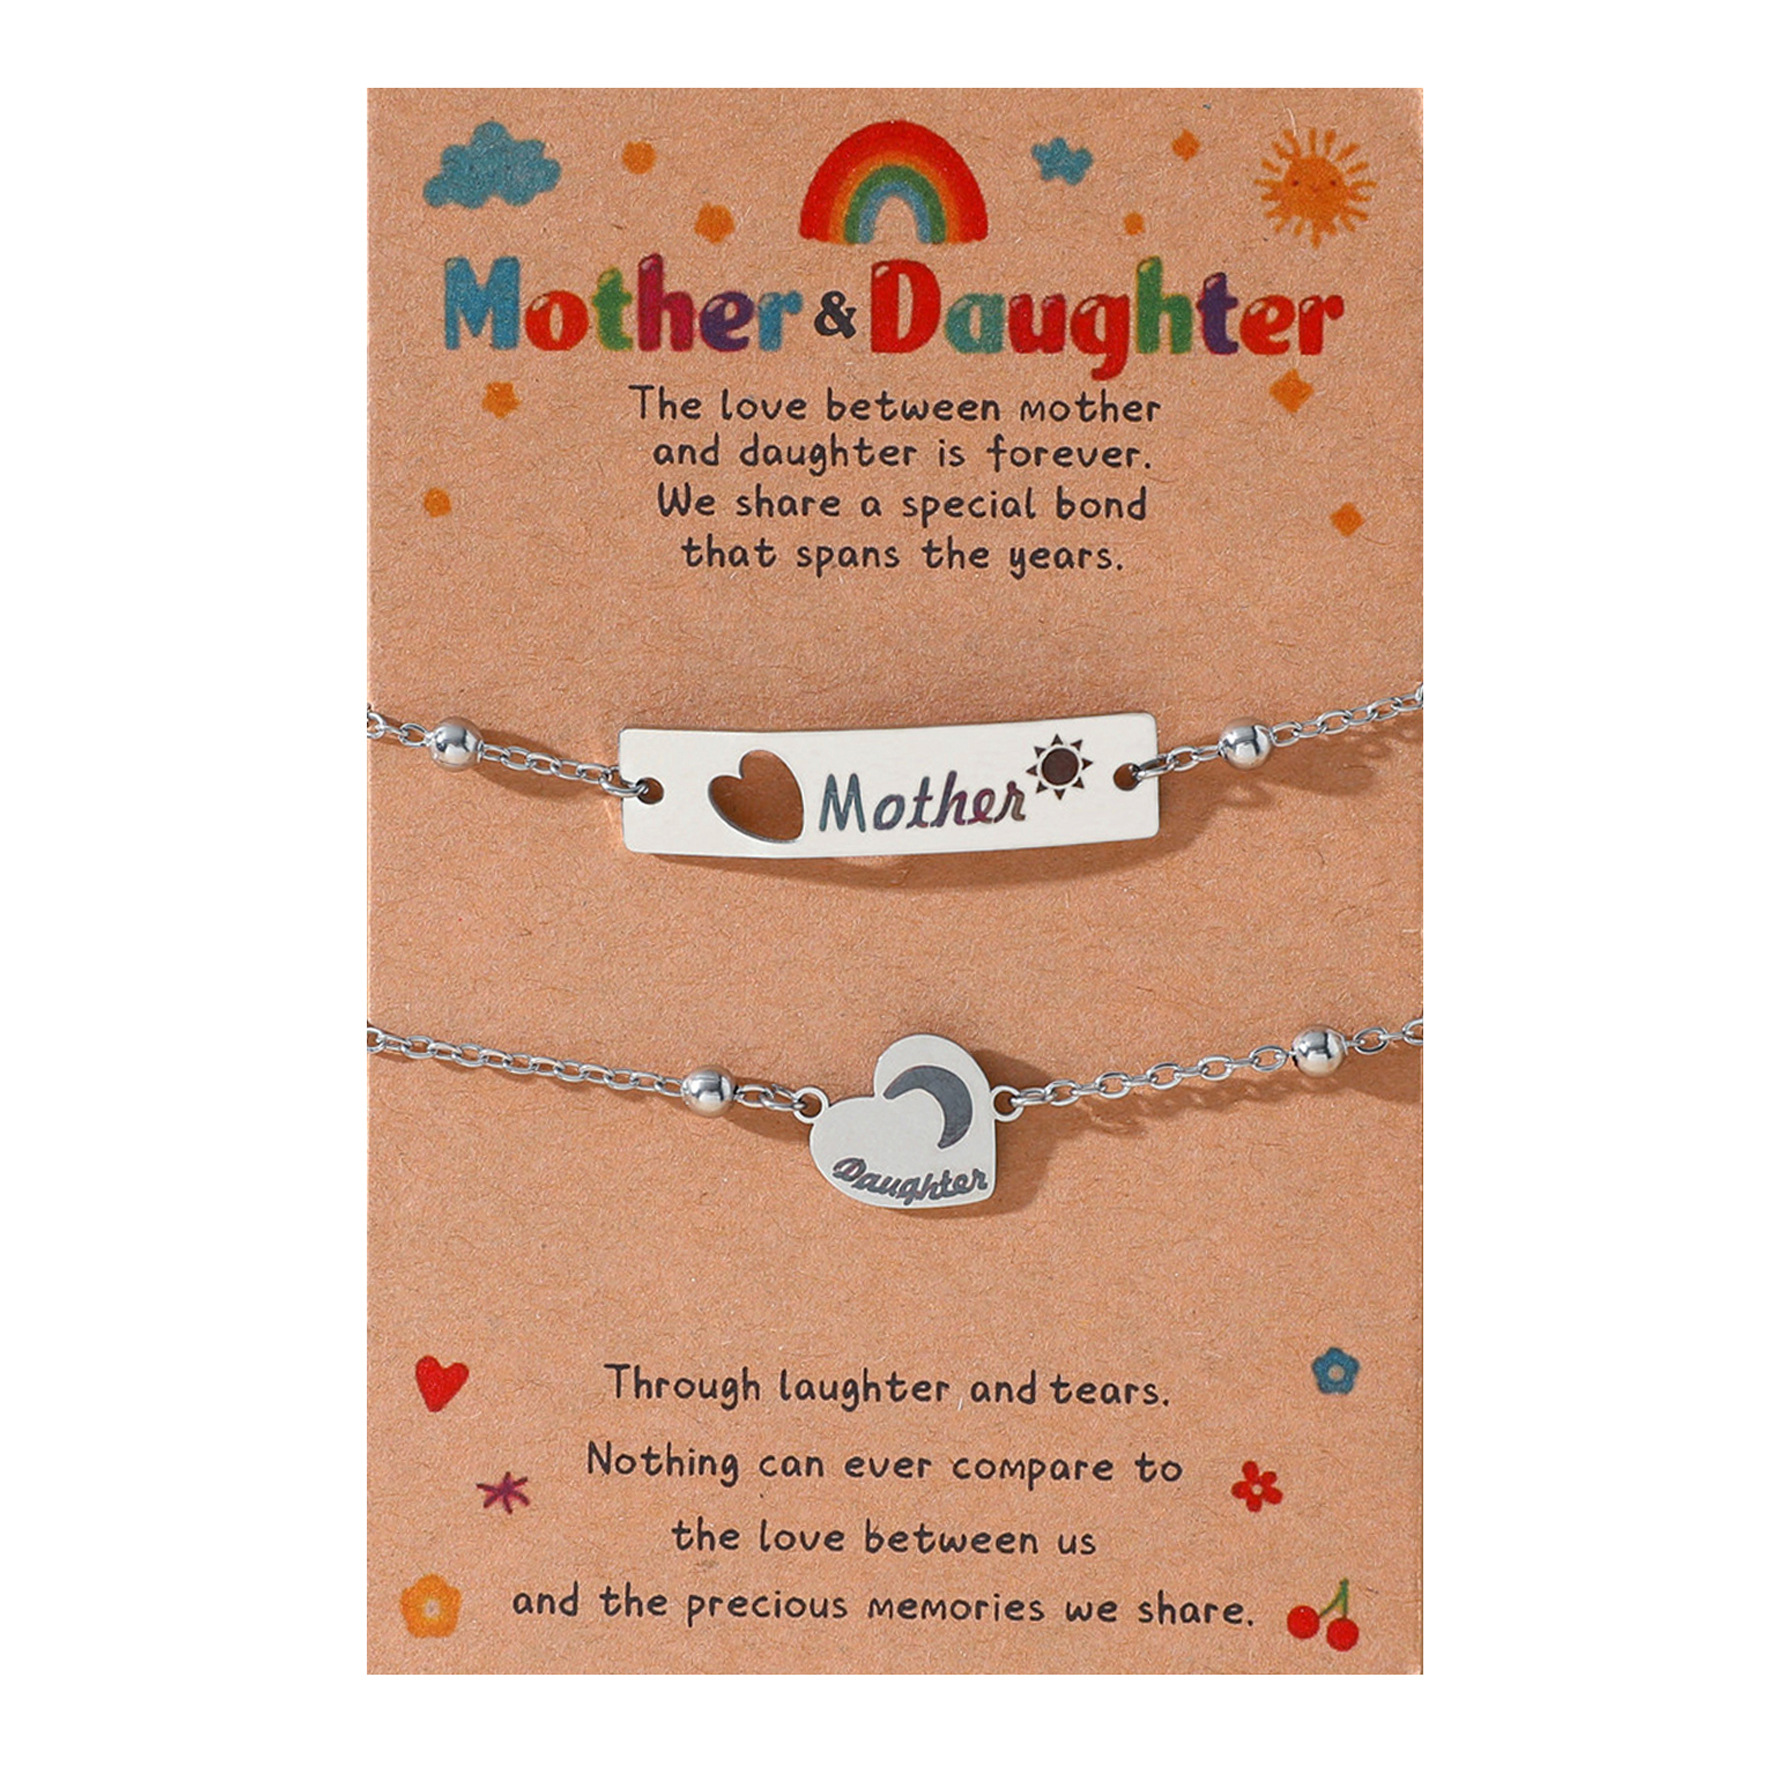 Mother and daughter chain